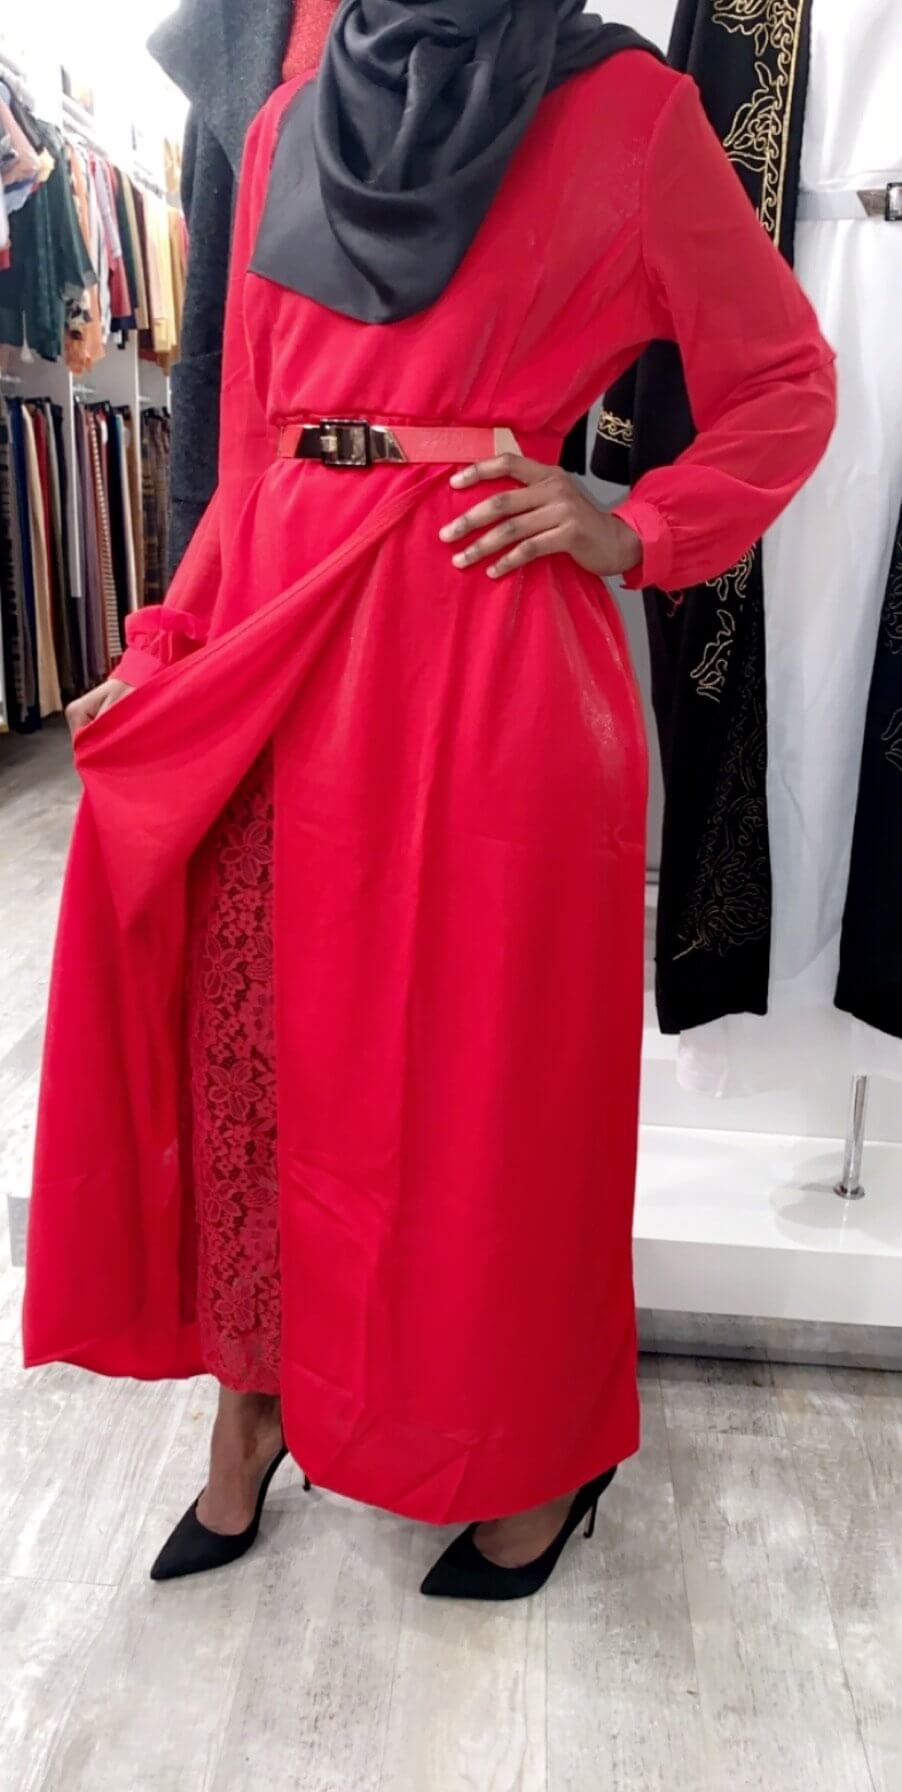 Aisha Lace Evening Dress in red color available at ZIZI Boutique